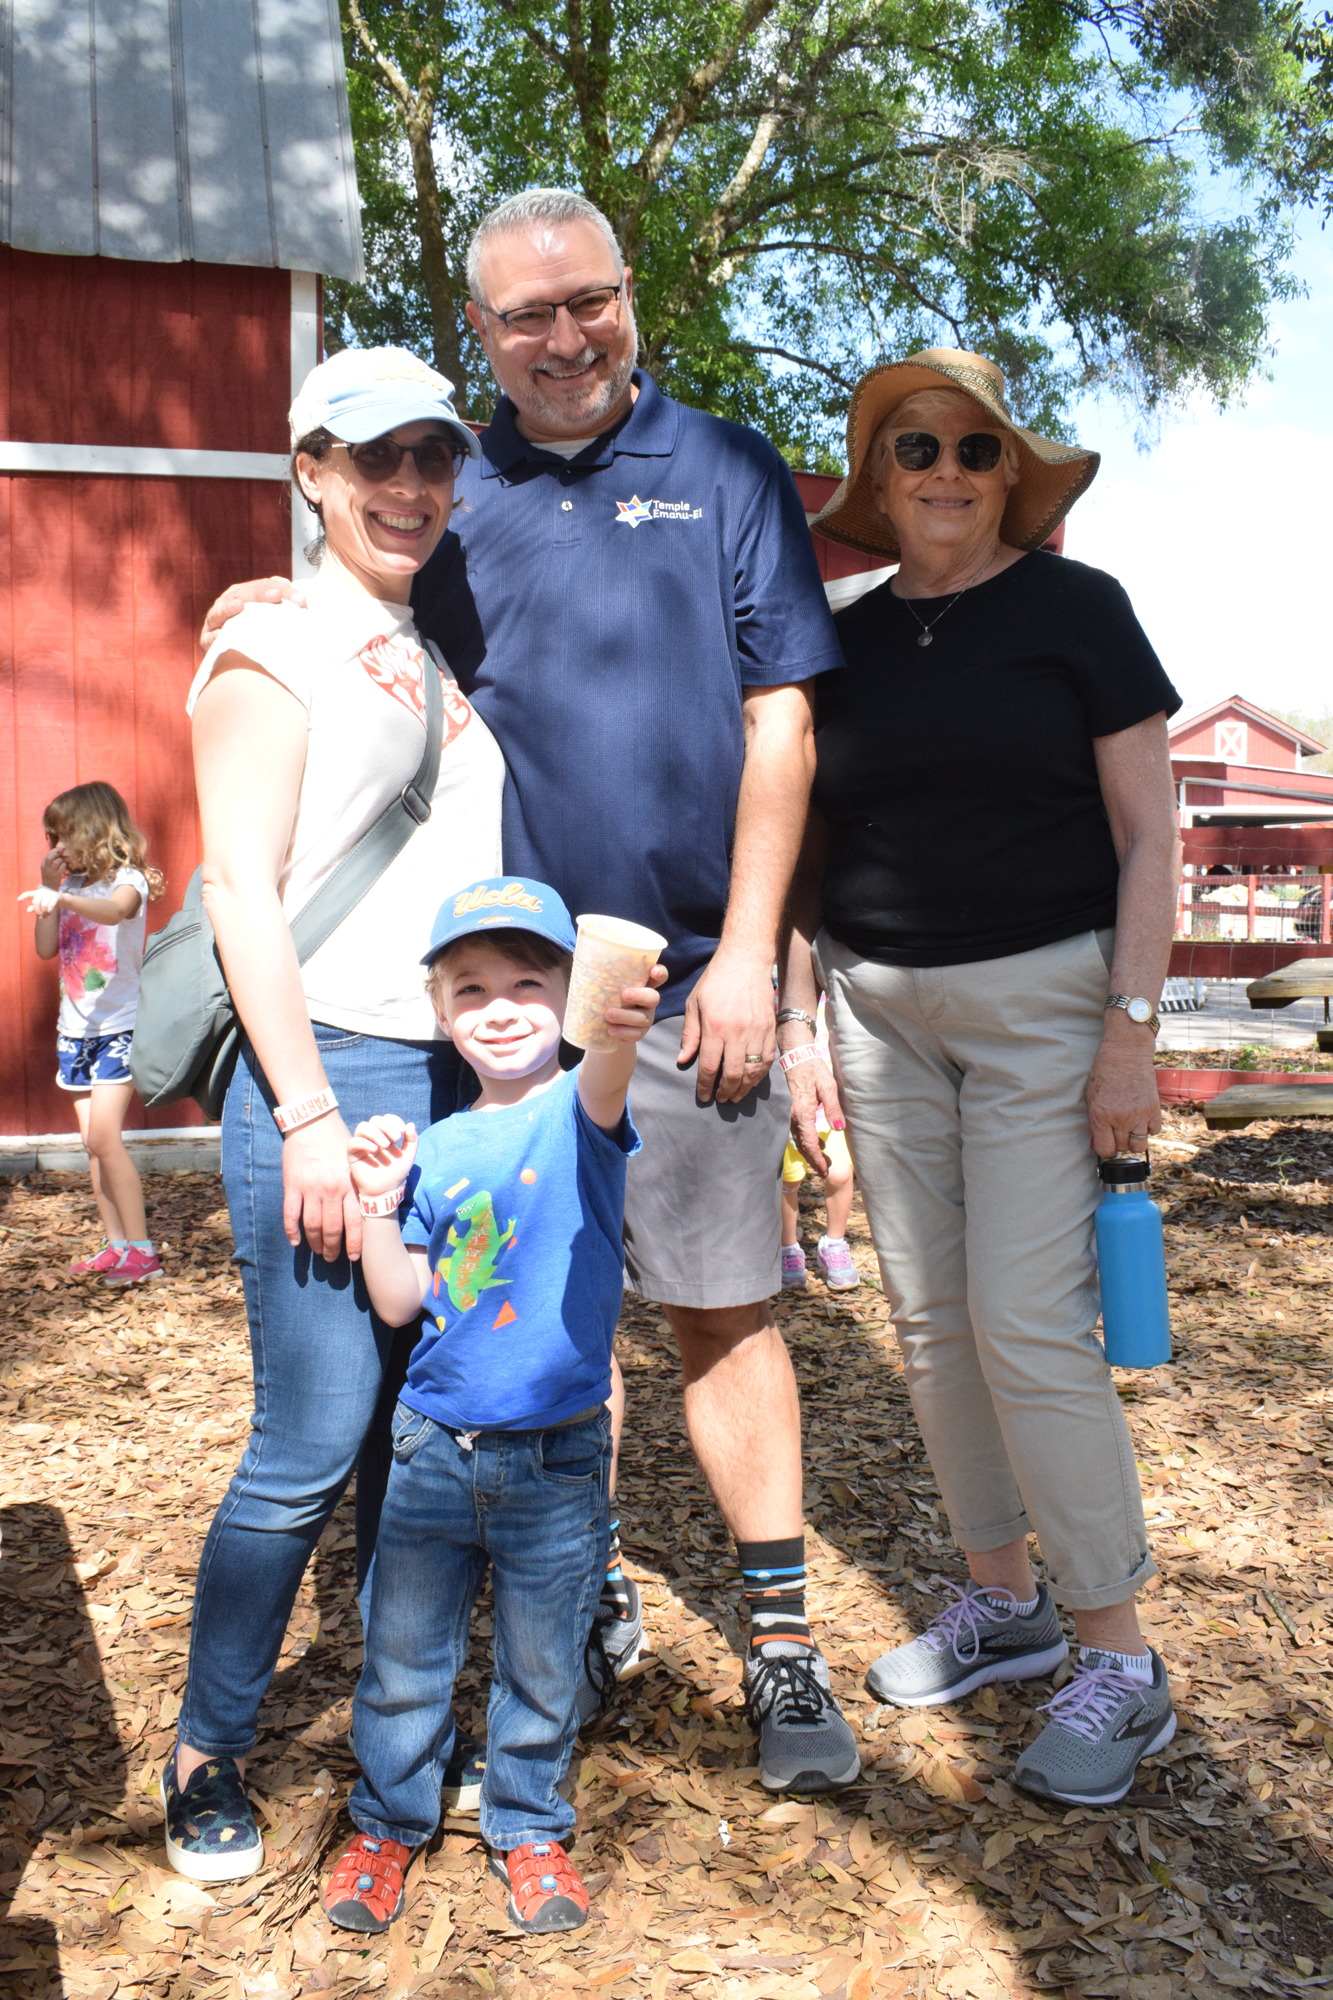 Sarasota's Shayna Shefrin looks forward to spending time at Hunsader Farms with her 4-year-old son, Jacob Shefrin, Rabbi Michael Shefrin and Mimi Weisel.